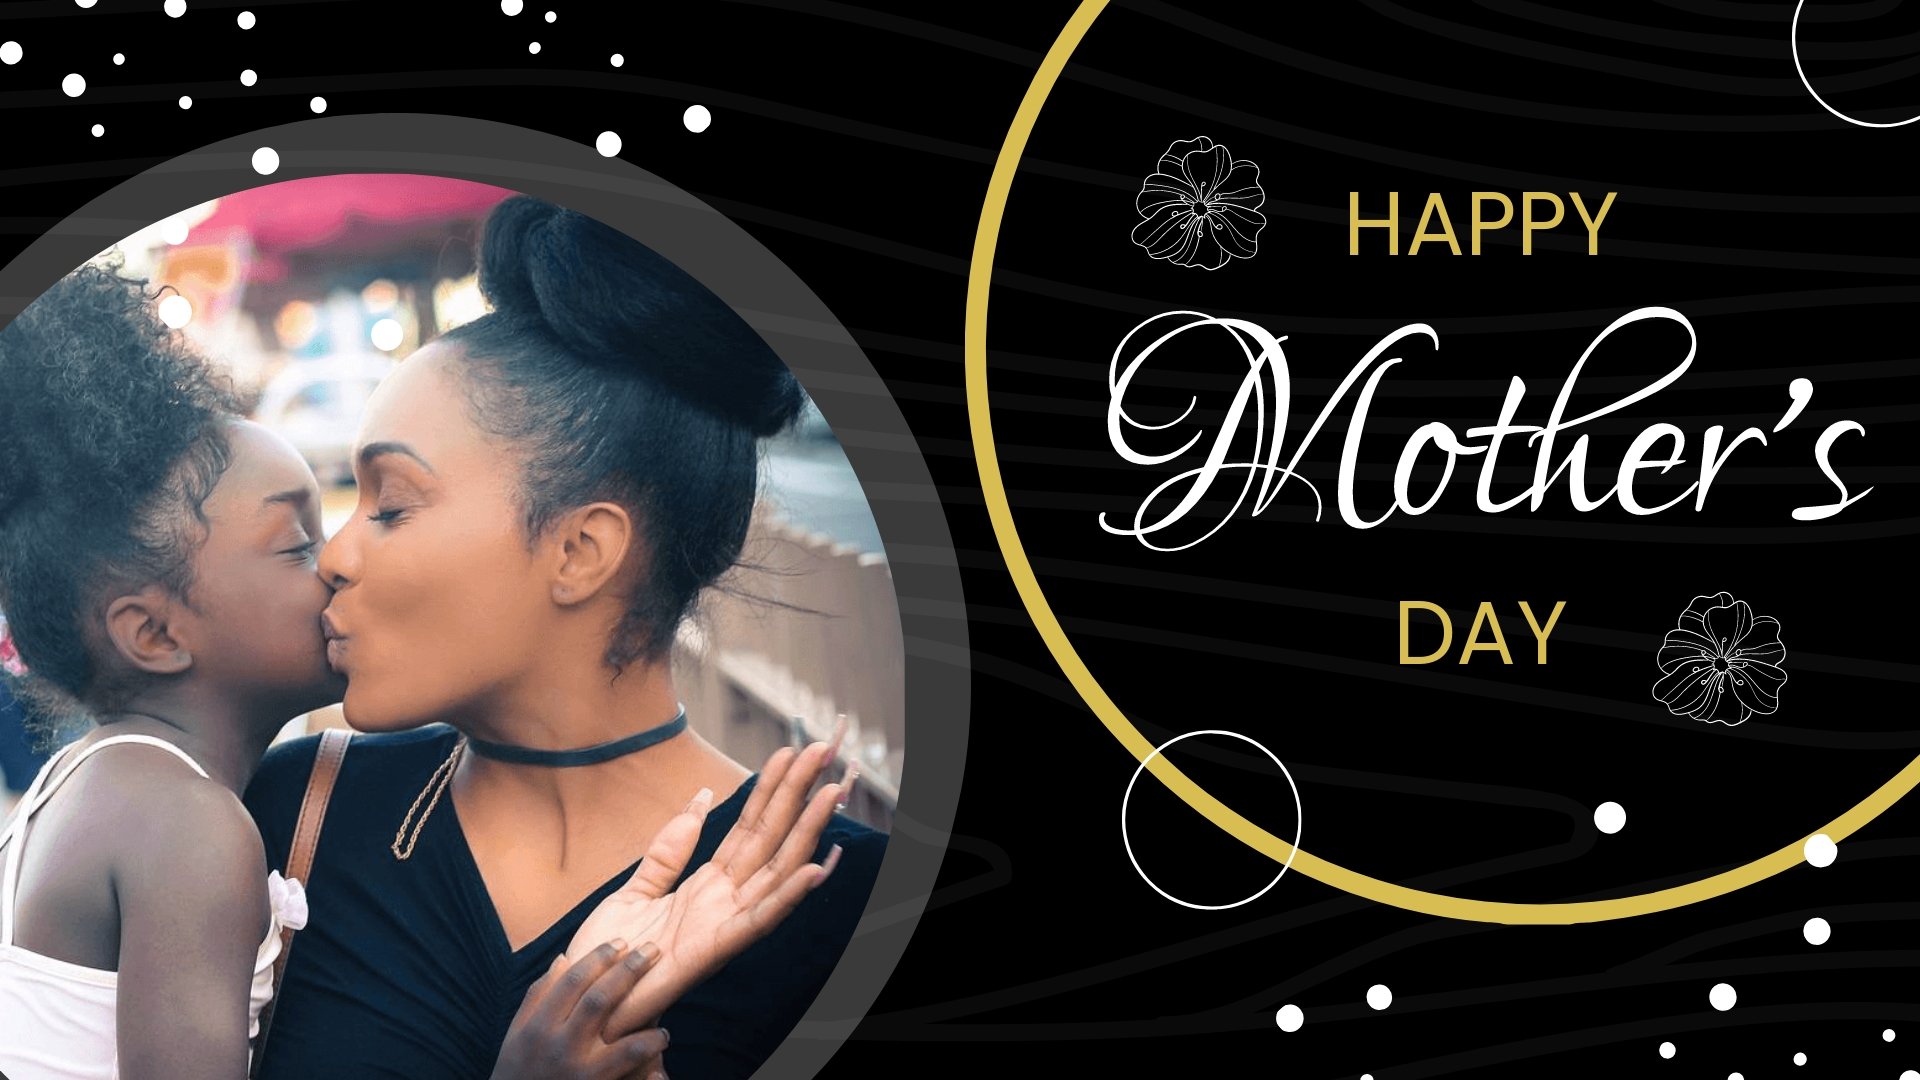 Happy Mother's Day Black Image